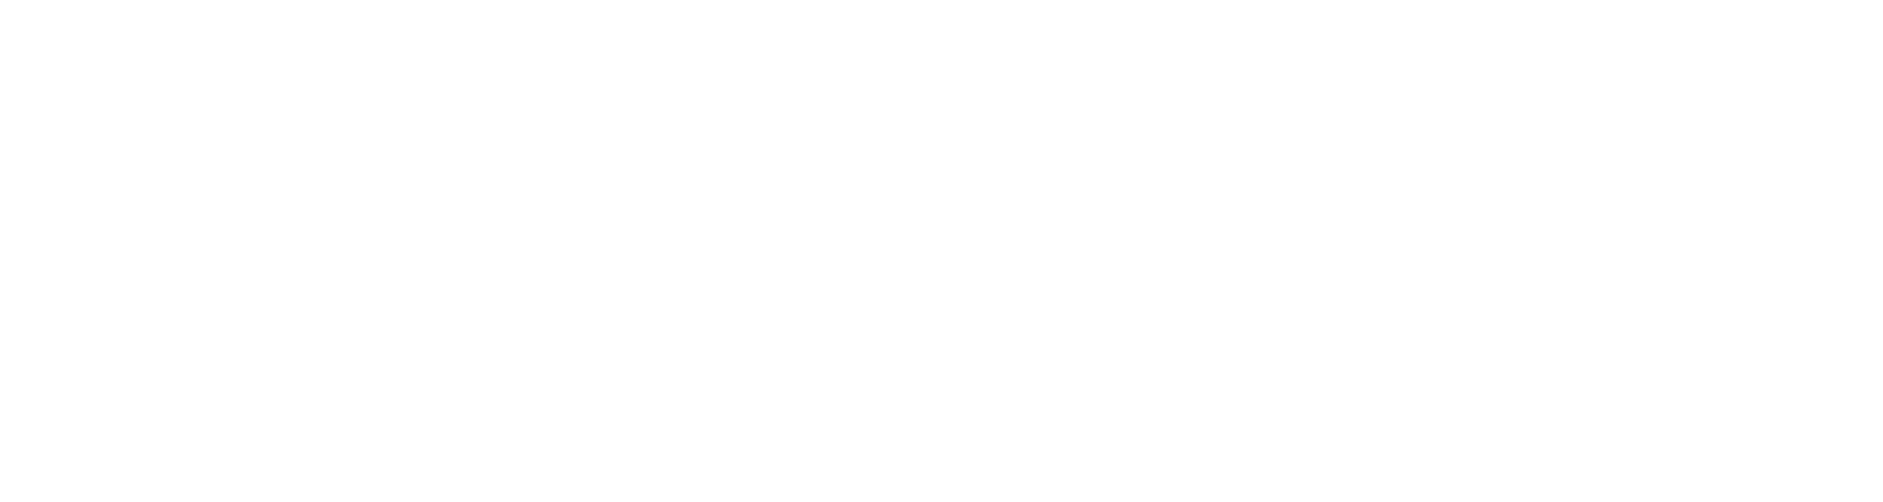 INFOCAR - Toronto's Most Comprehensive New and Used Auto Trading Platform